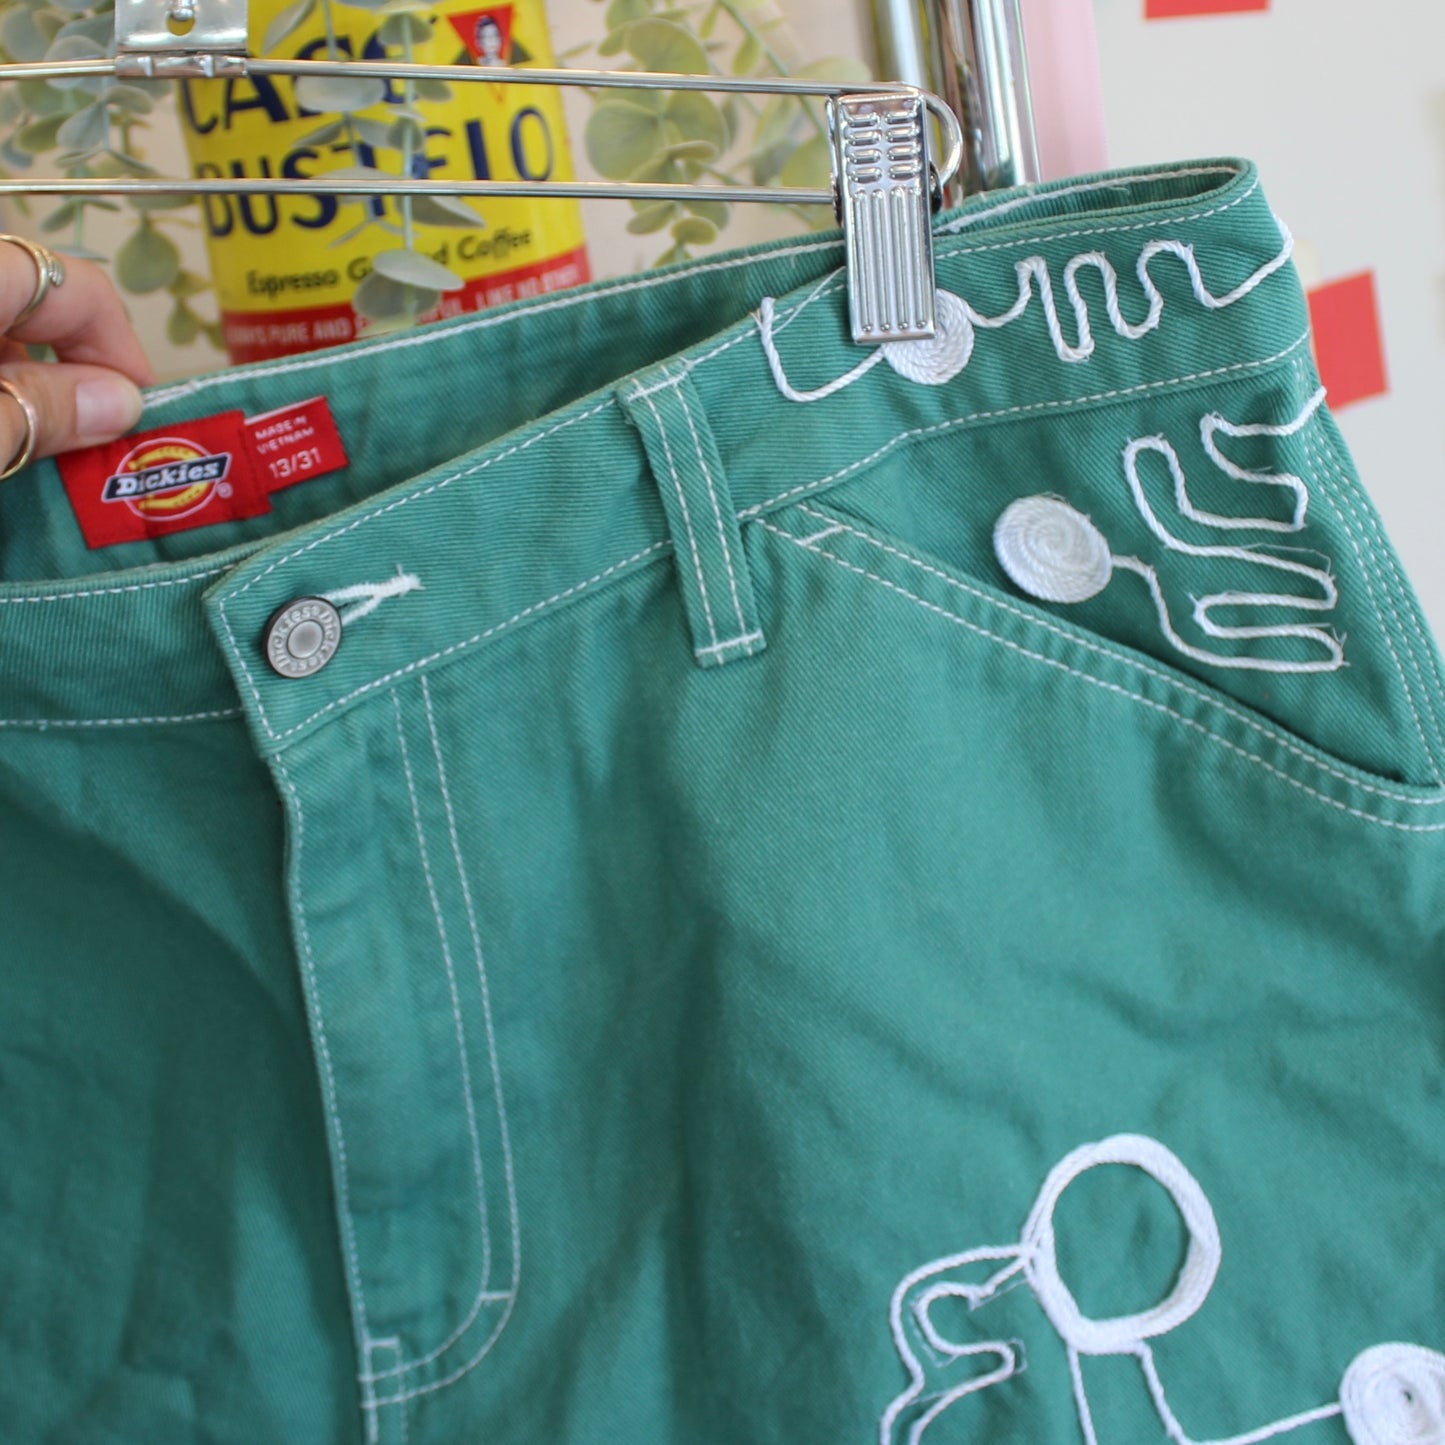 Silly string dickies shorts(13)